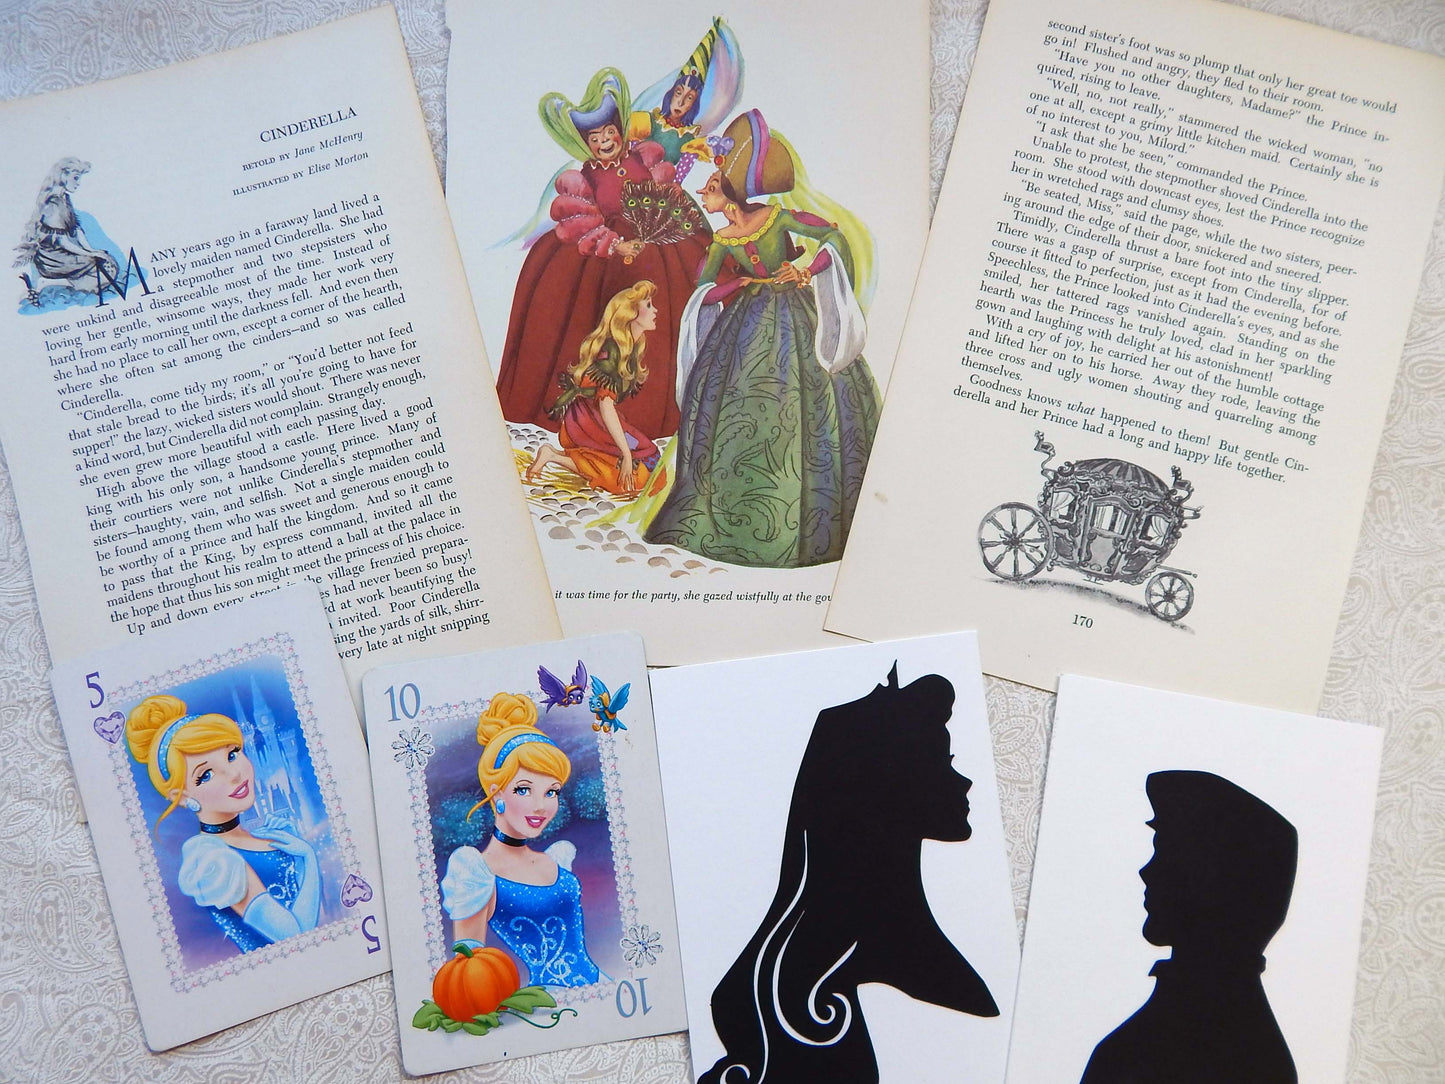 CINDERELLA Themed Pack with Books, Pages, and Ephemera